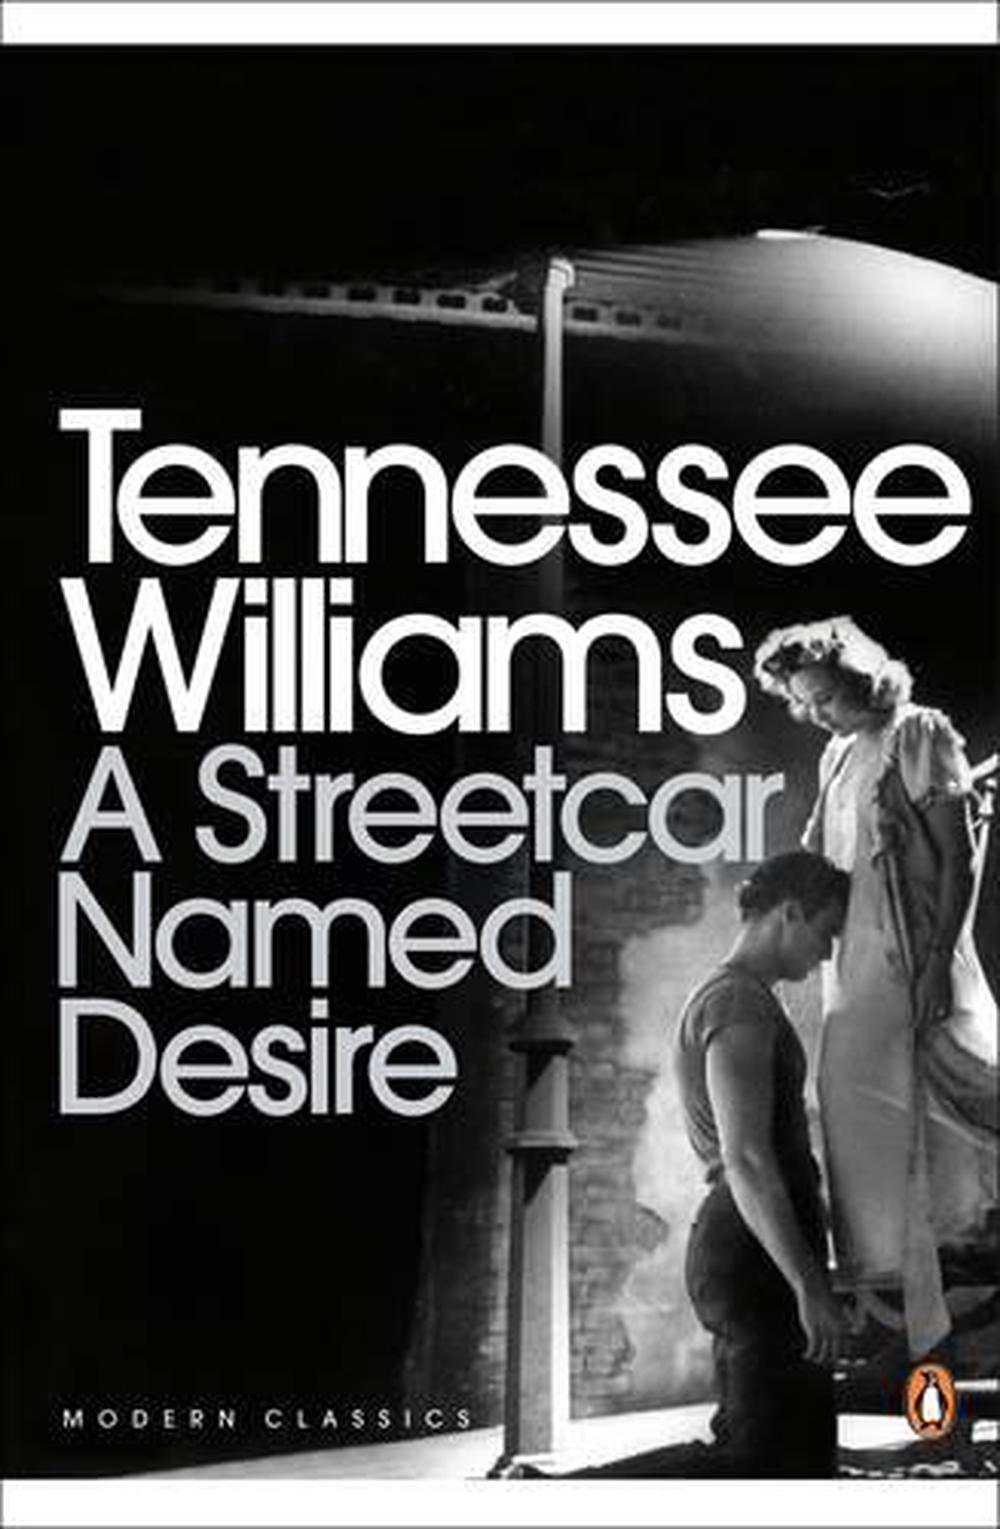 Tennessee Williams: A streetcar named Desire (Dramatists Play Service Inc.)